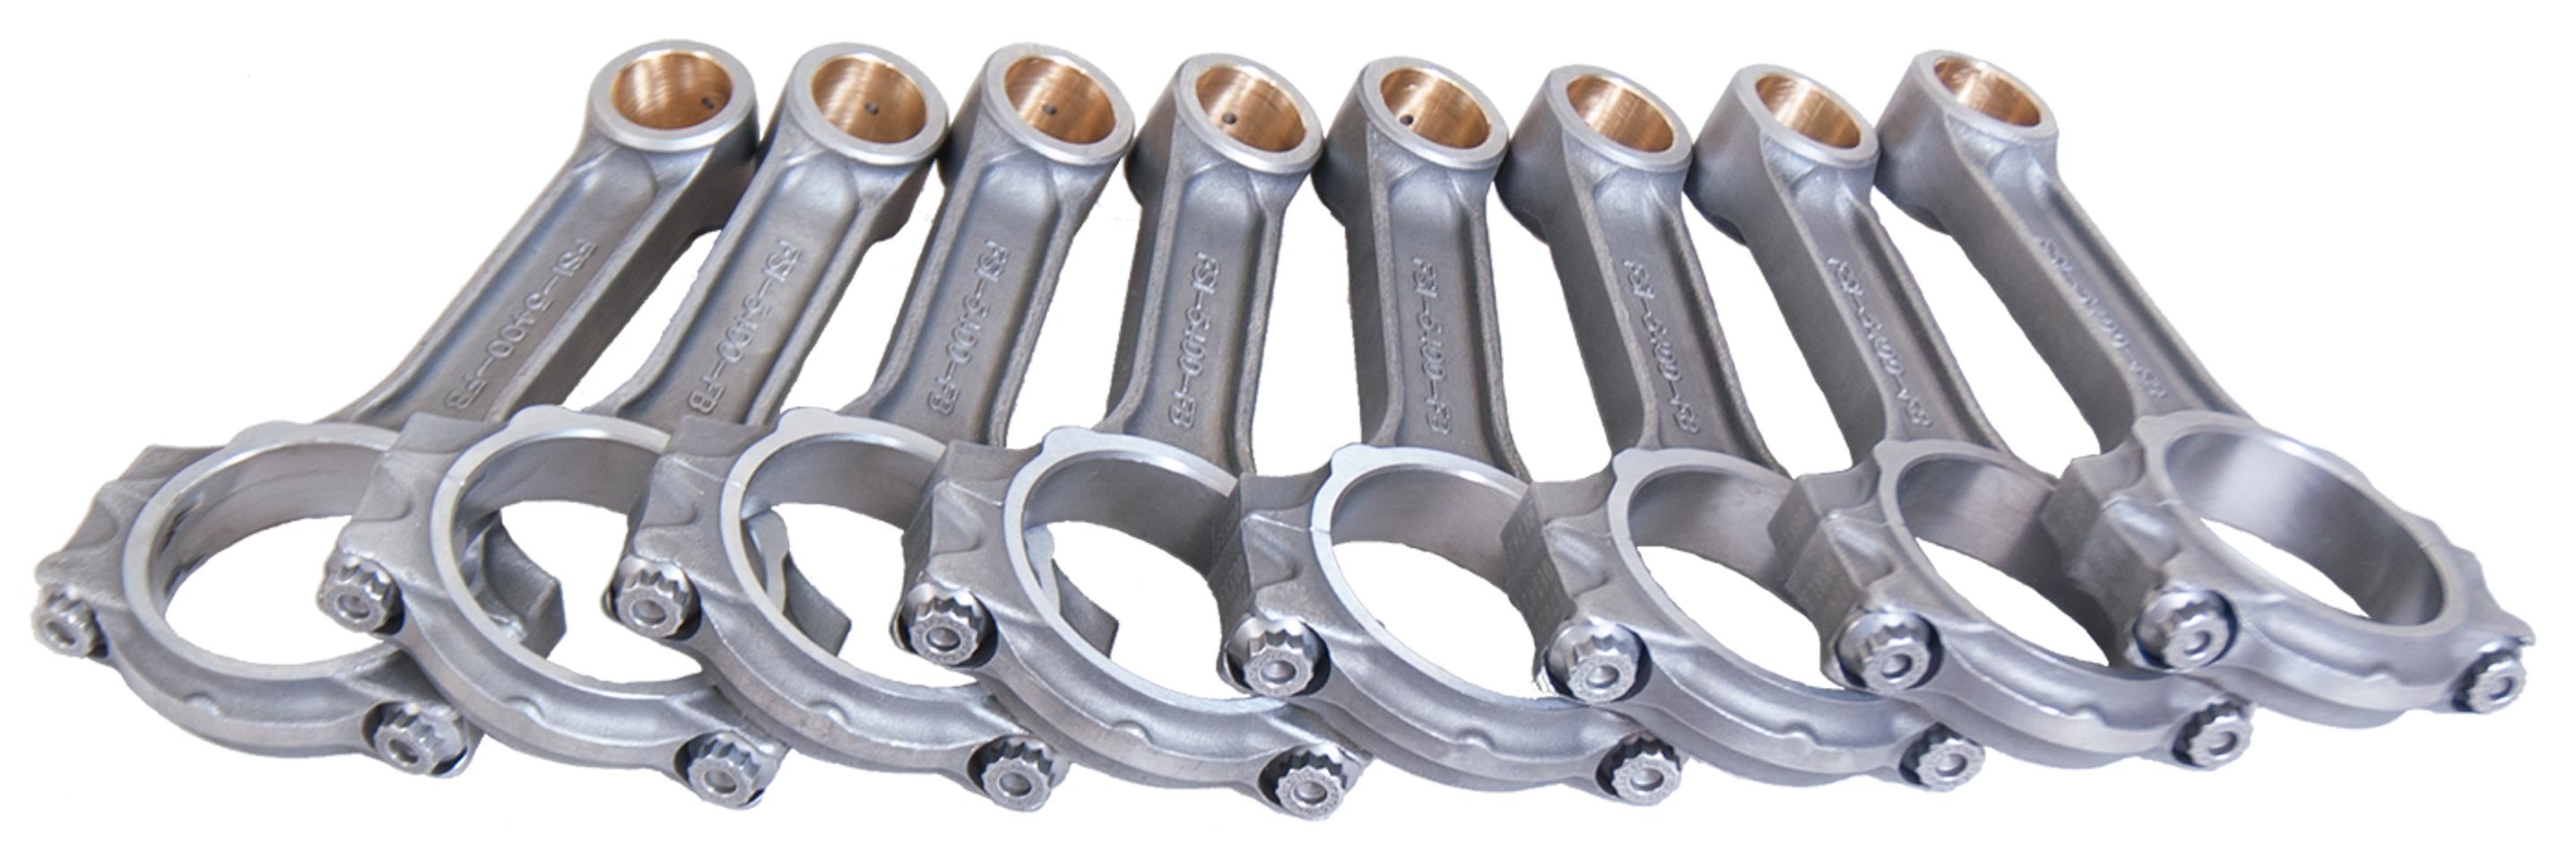 Eagle FSI5400FB Connecting Rod, I-Beam, 5.400 in Long, Press Fit, 7/16 in Cap Screw, Forged Steel, Small Block Ford, Set of 8